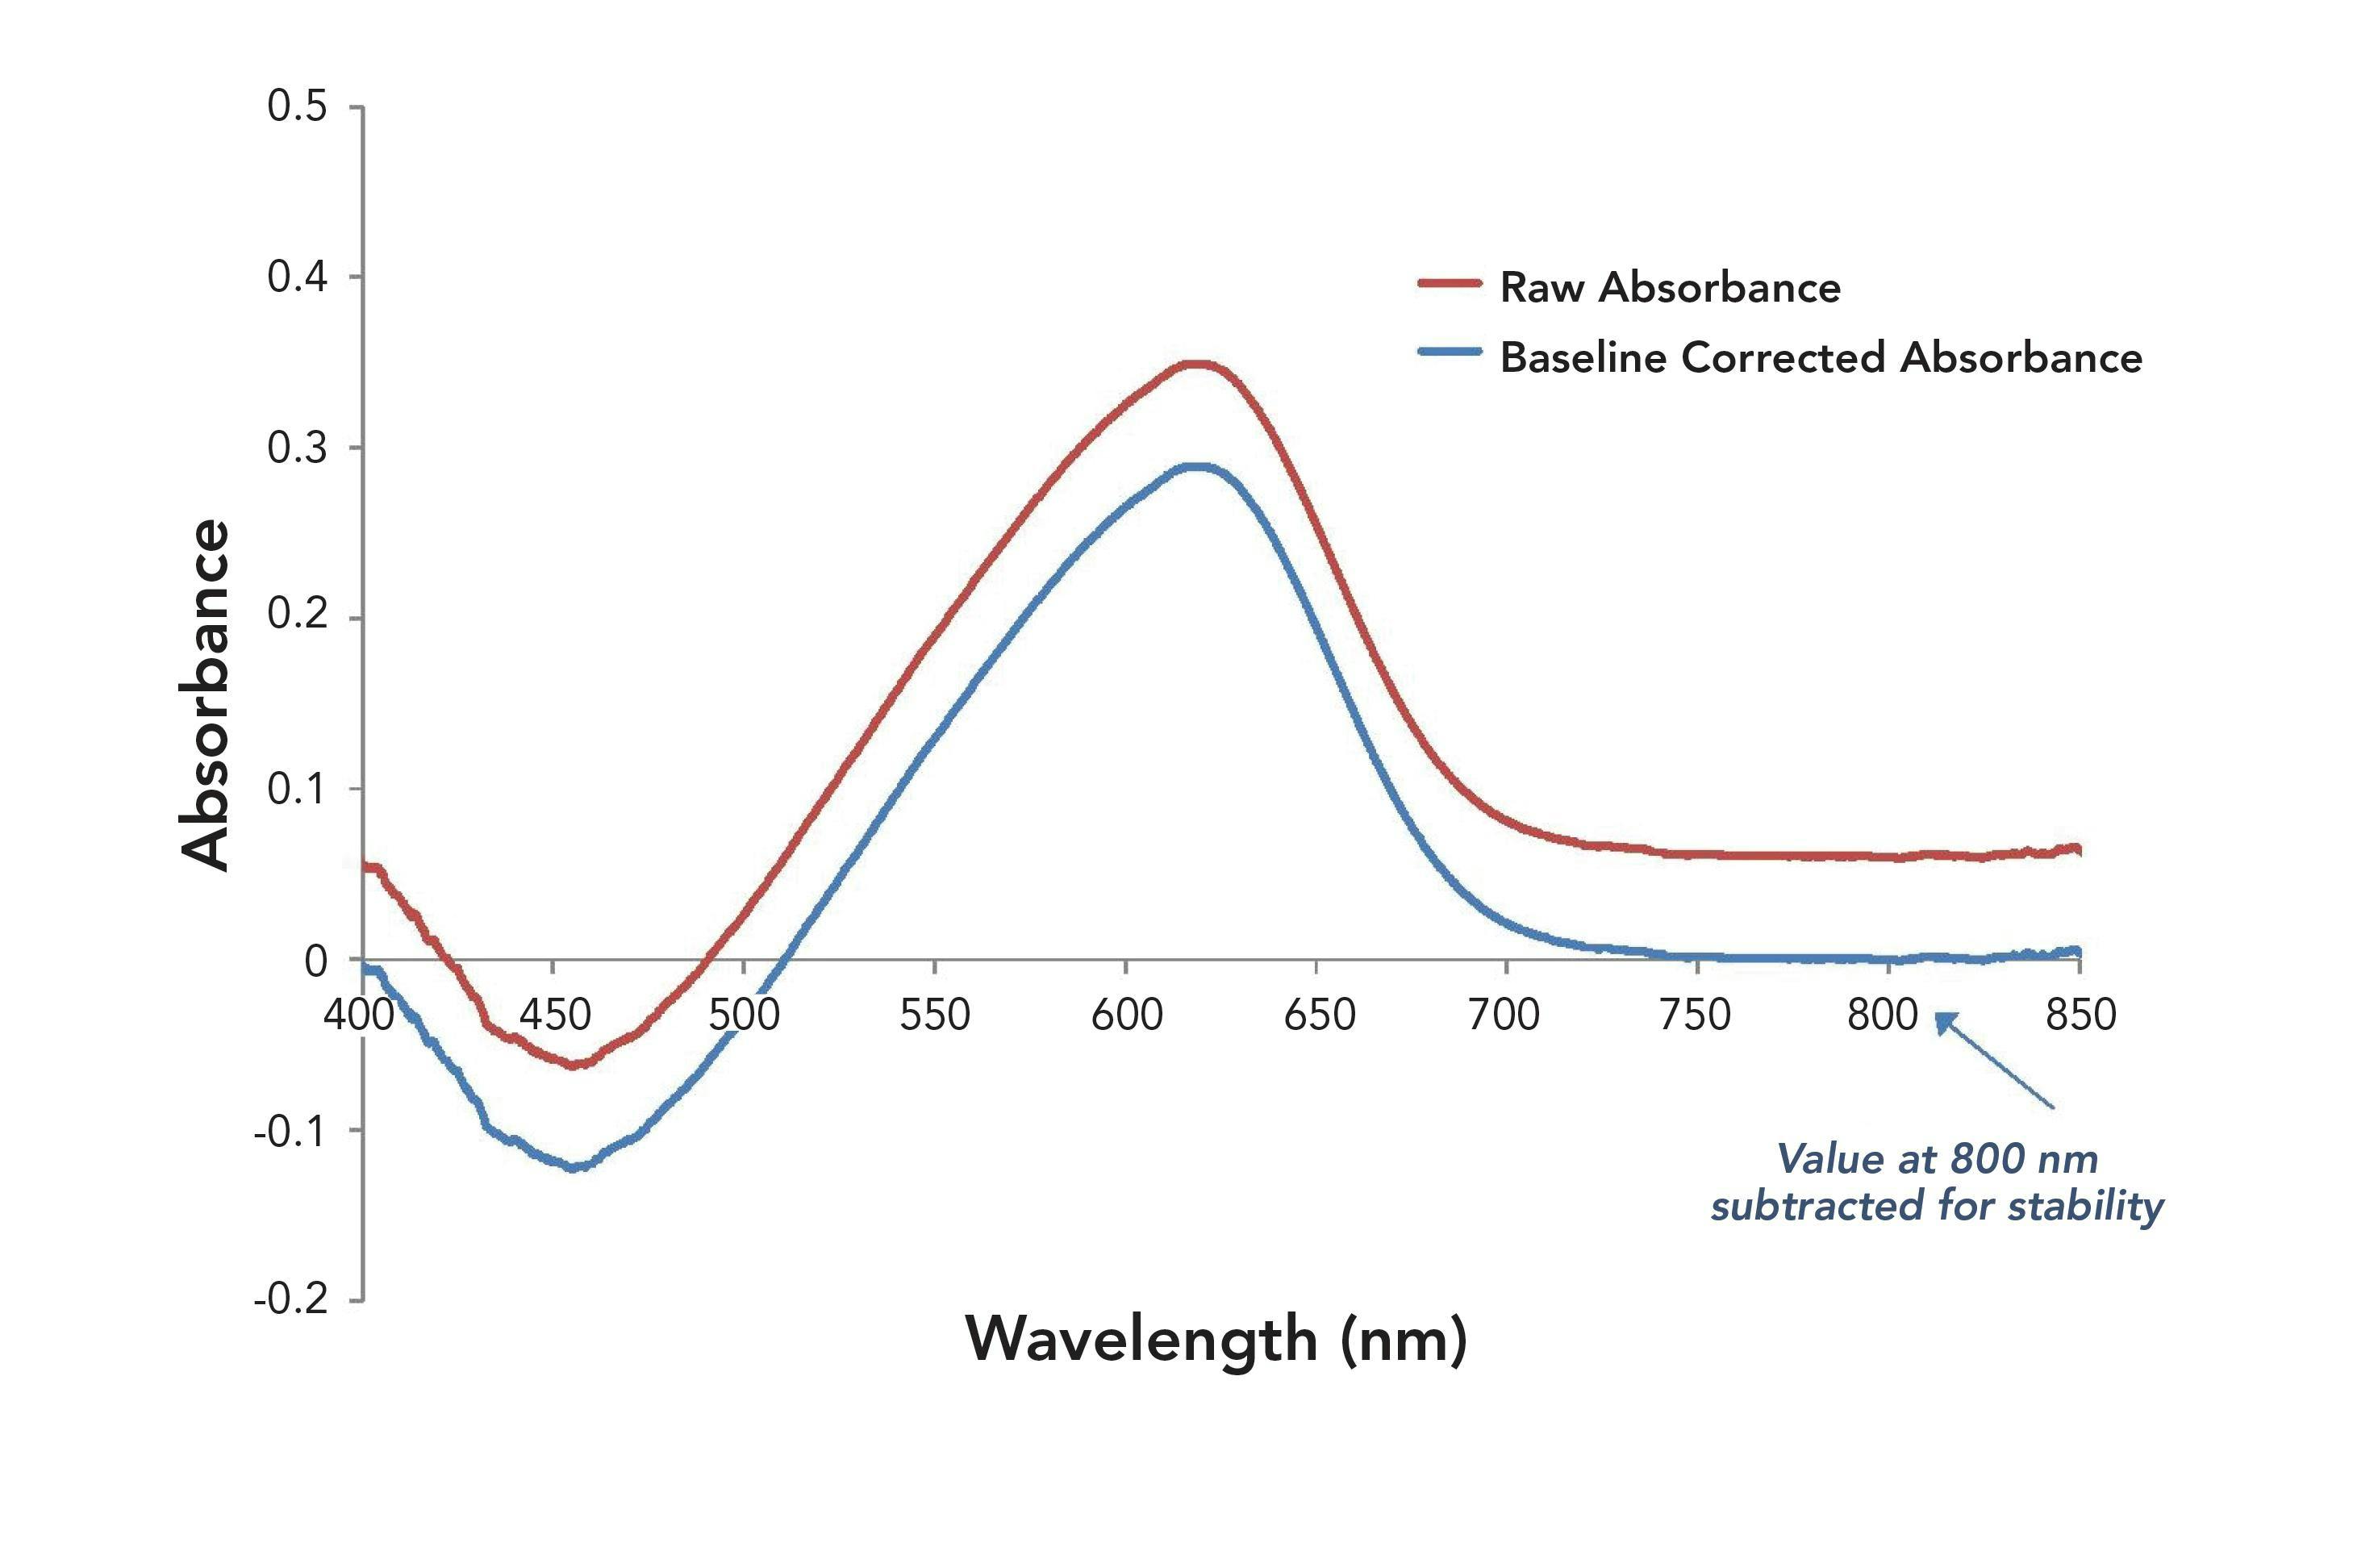 Figure 2: Absorbance of pH-responsive dye showing raw (red) and single-point baseline corrected (blue) spectra. Baseline correction of absorbance data can be applied to help mitigate the effects of measurement variability.